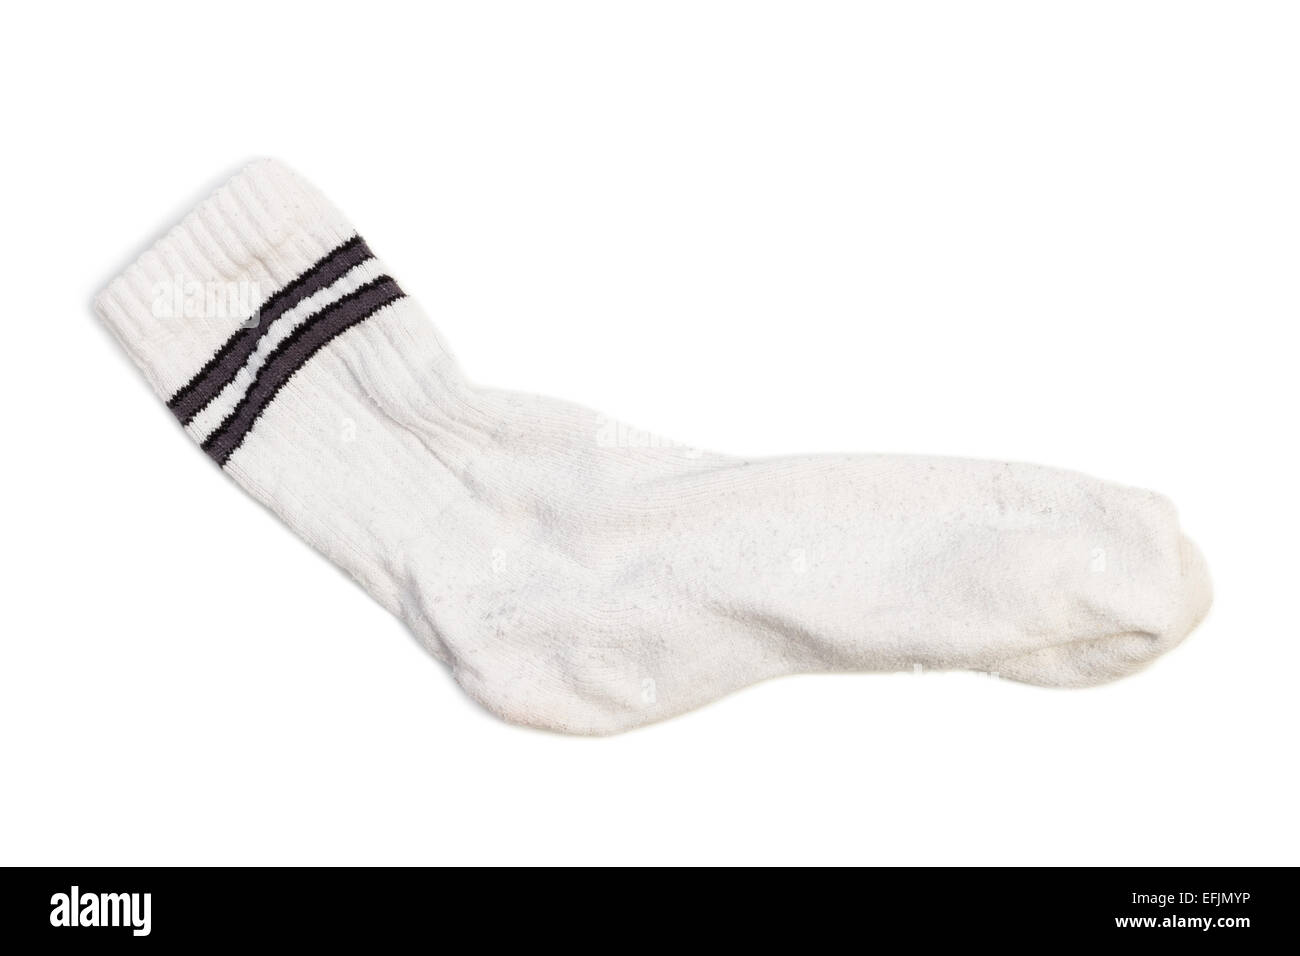 Closeup of one clean white tennis/sport sock isolated on white background Stock Photo